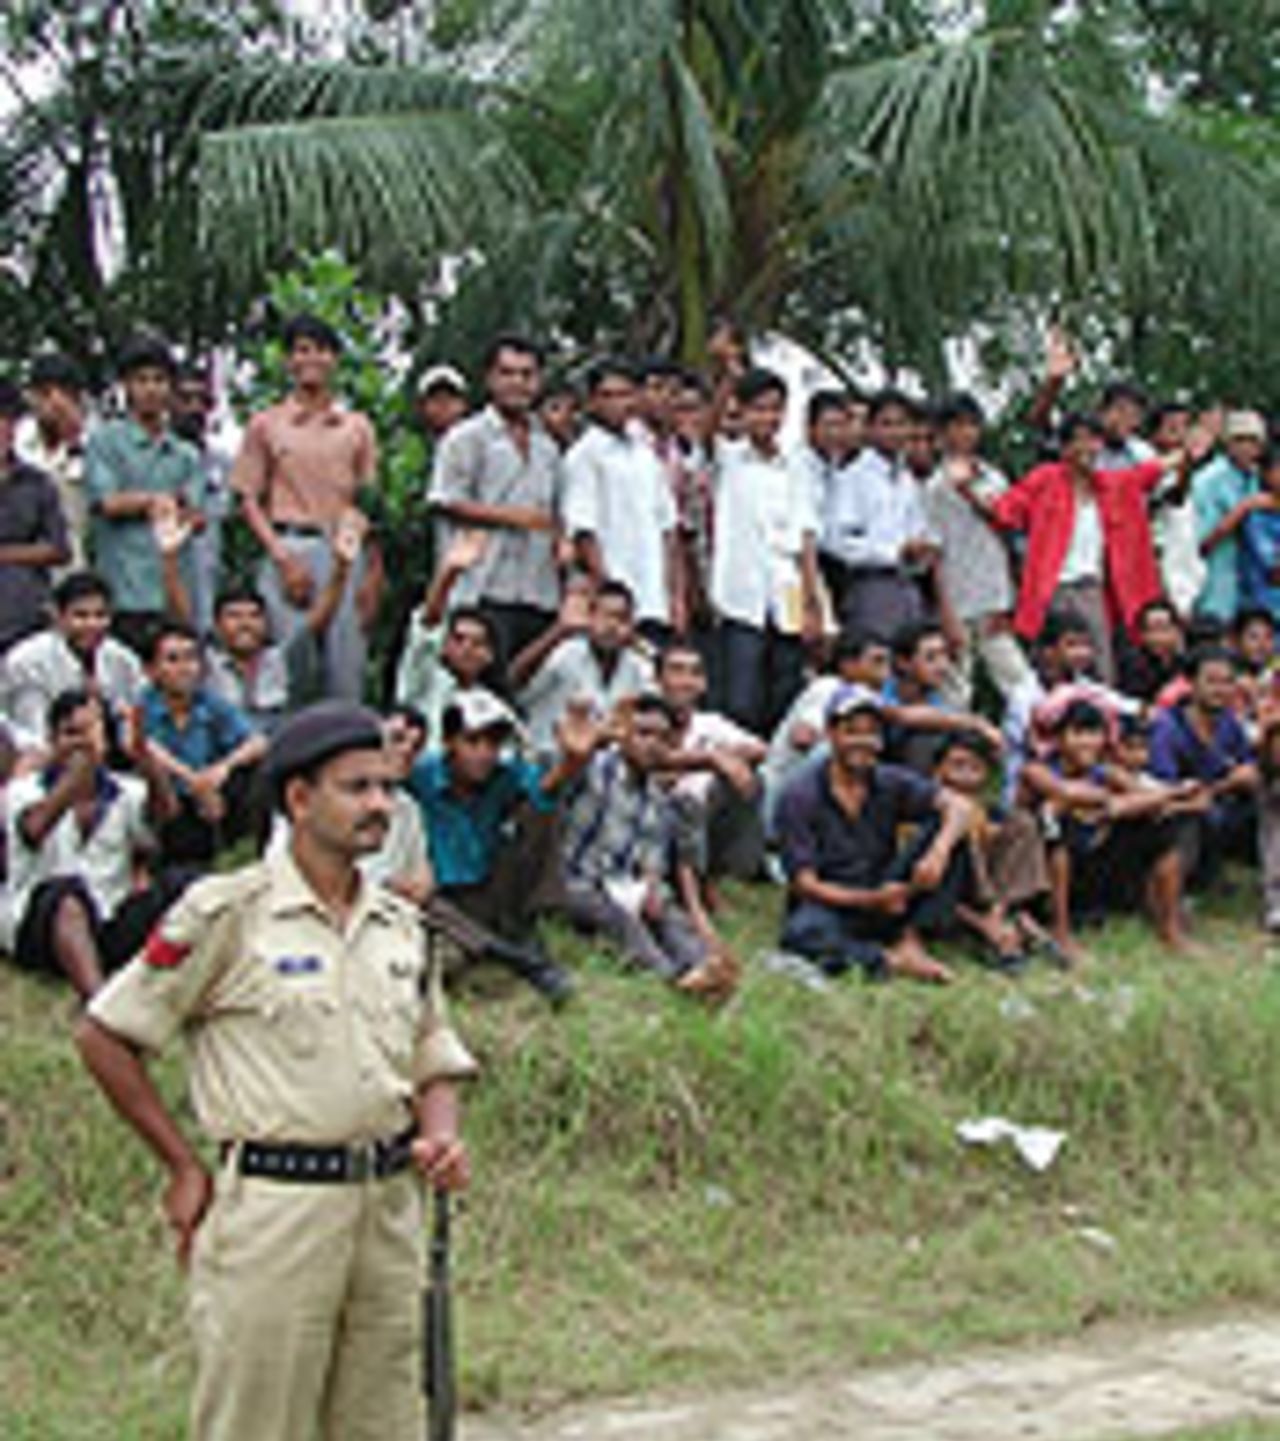 Crowd control at the BKSP for England's tour match against Bangladesh A